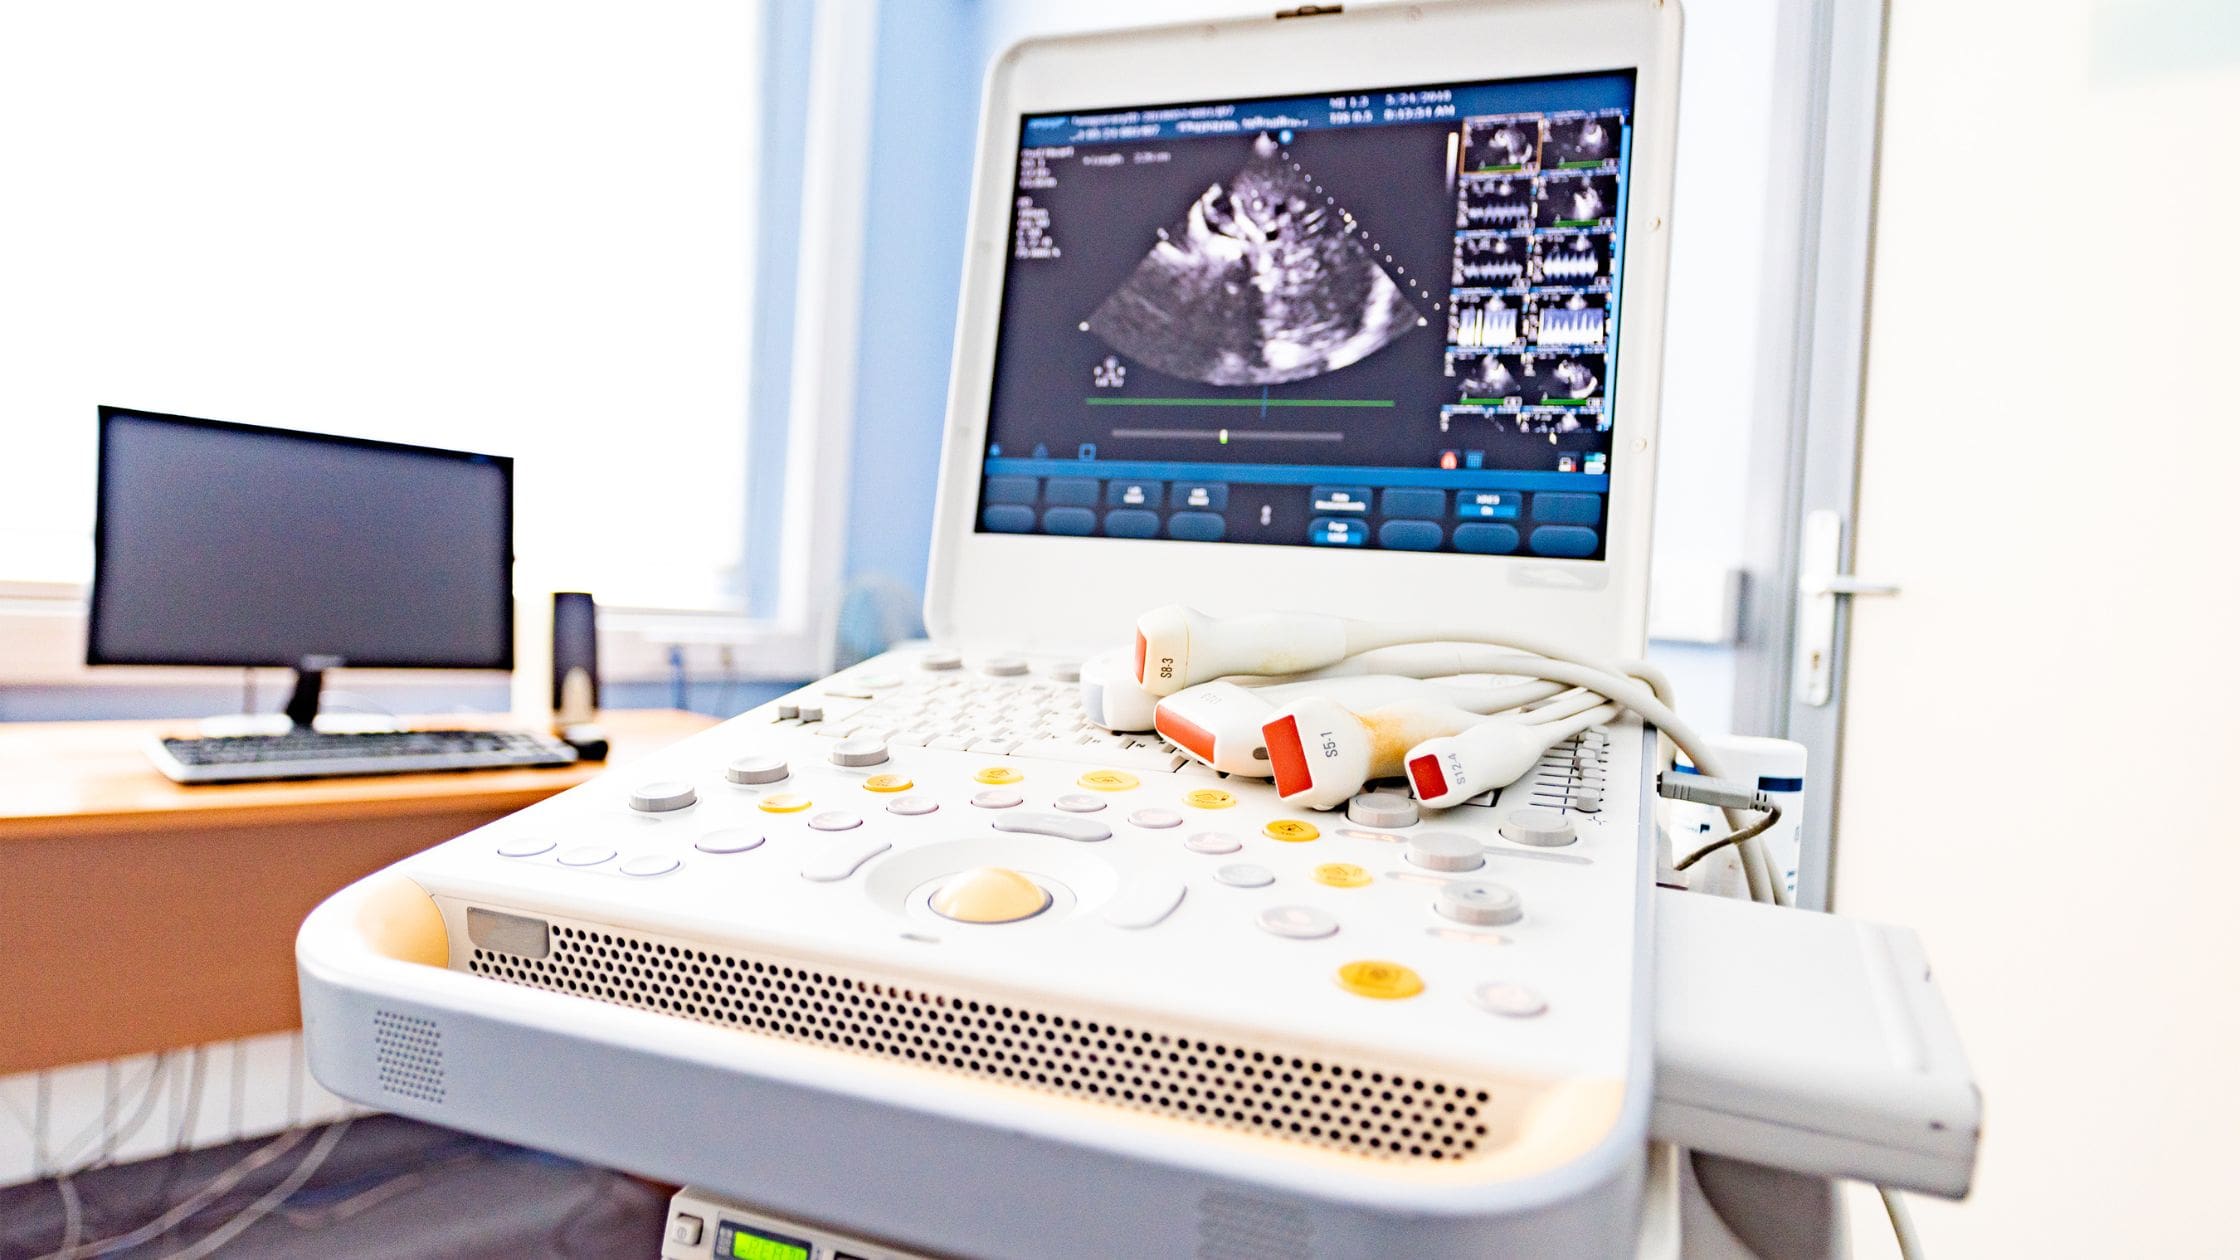 What Are The Different Types of Ultrasound Machines and Their Uses and Applications?